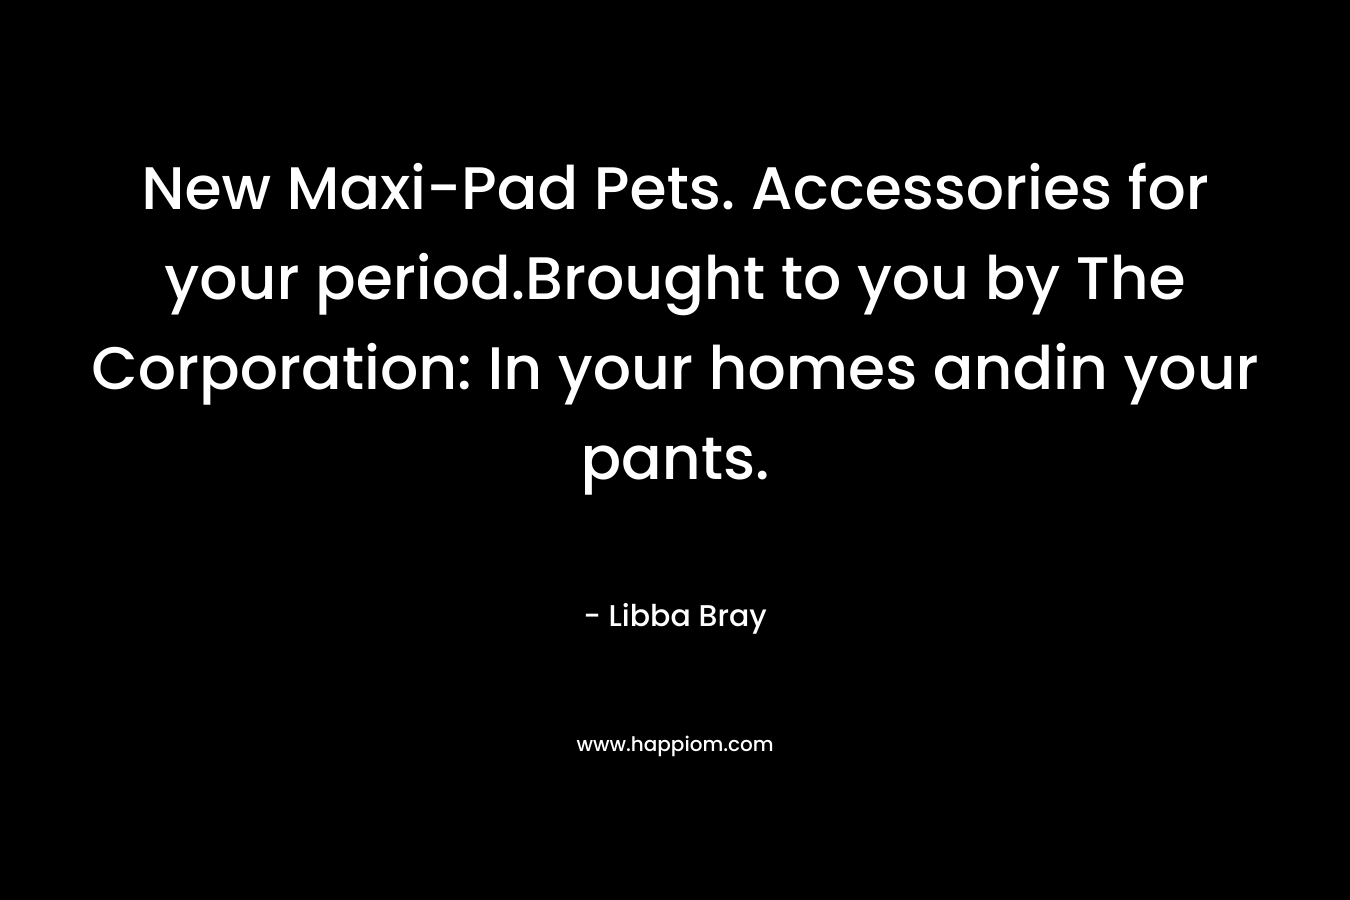 New Maxi-Pad Pets. Accessories for your period.Brought to you by The Corporation: In your homes andin your pants.